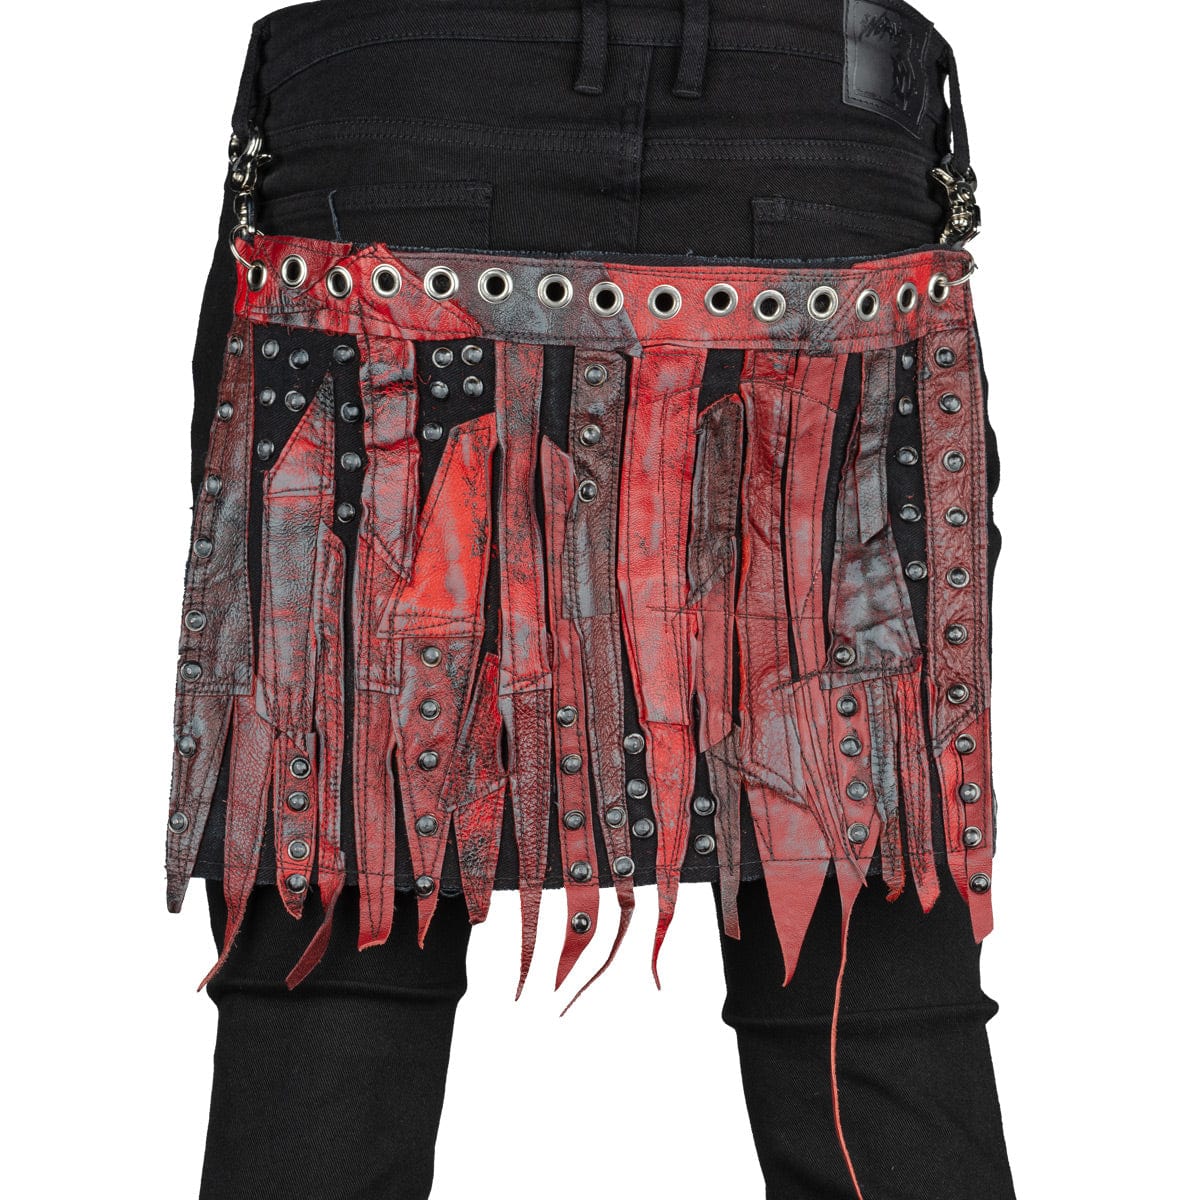 • Wornstar Custom Stage Wear Collection• Designed, made, and sold exclusively by Wornstar Clothing• Handmade at the time of order• Hand-studded and hand-sewn bum flap• Made with upcycled leather and denim• Wornstar Belt Flair™ • Rock N Roll Stage Accessory• Leather top •